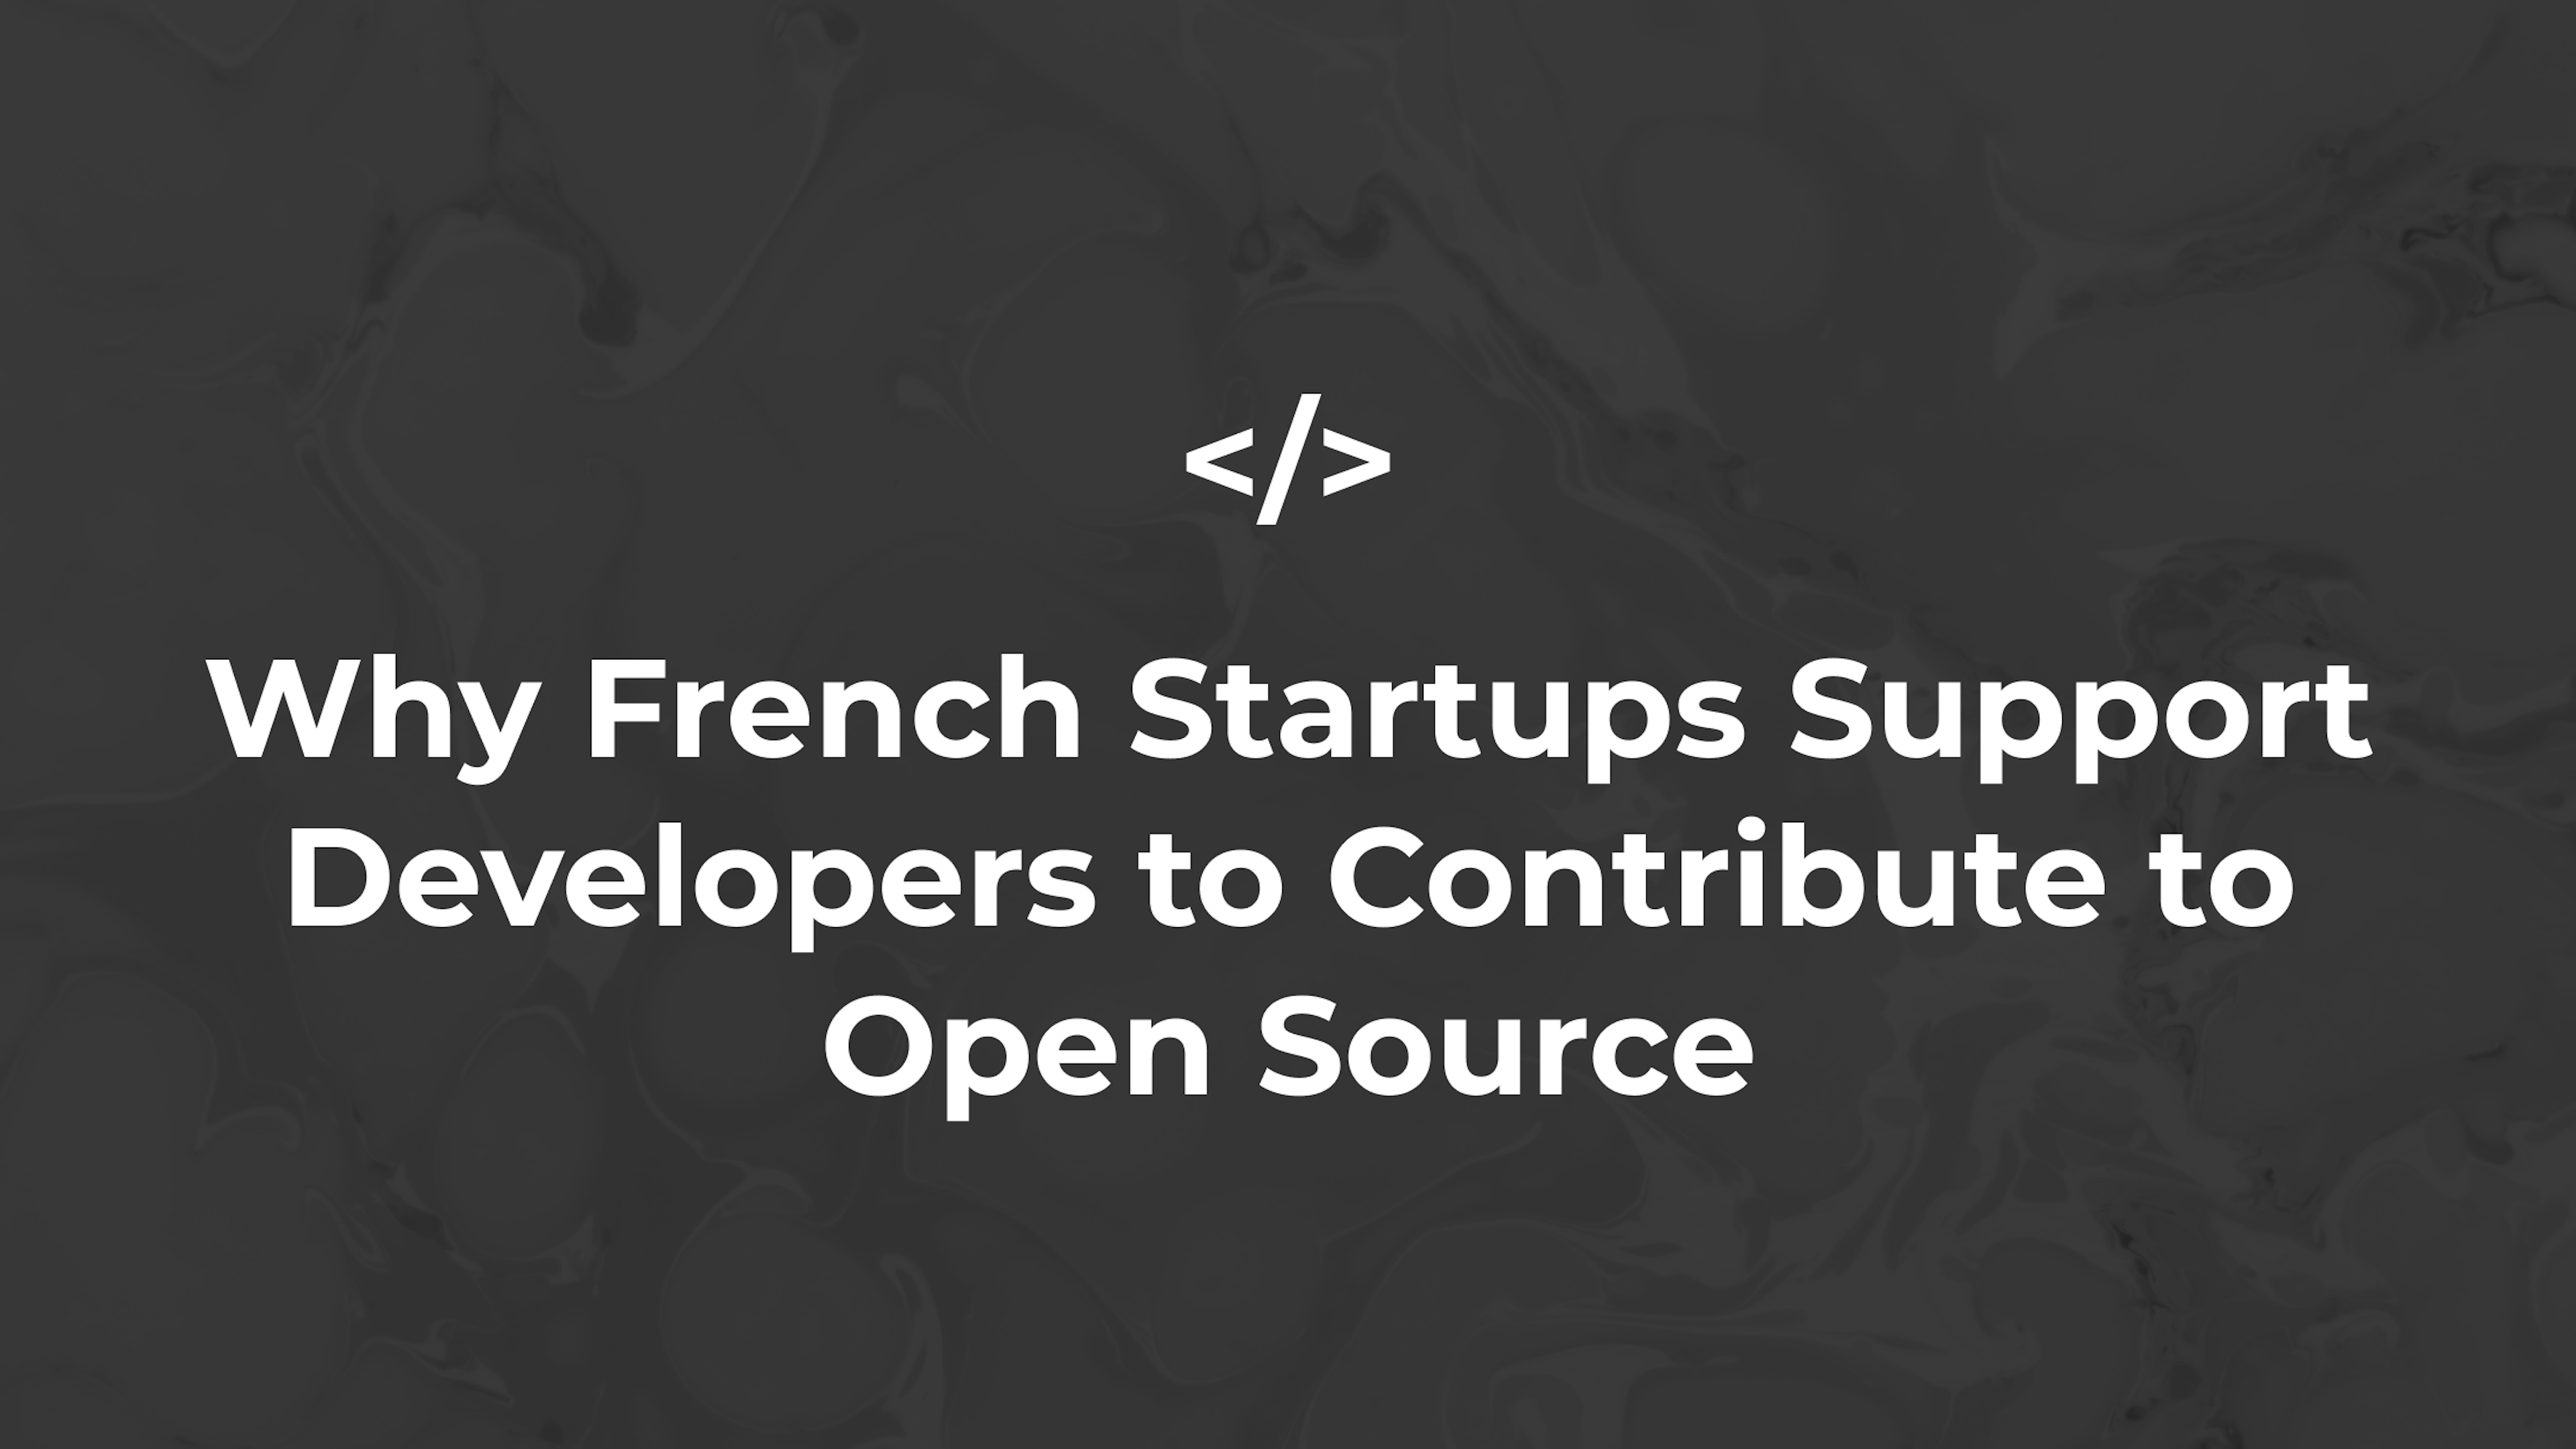 Why French Startups Support Developers to Contribute to Open Source